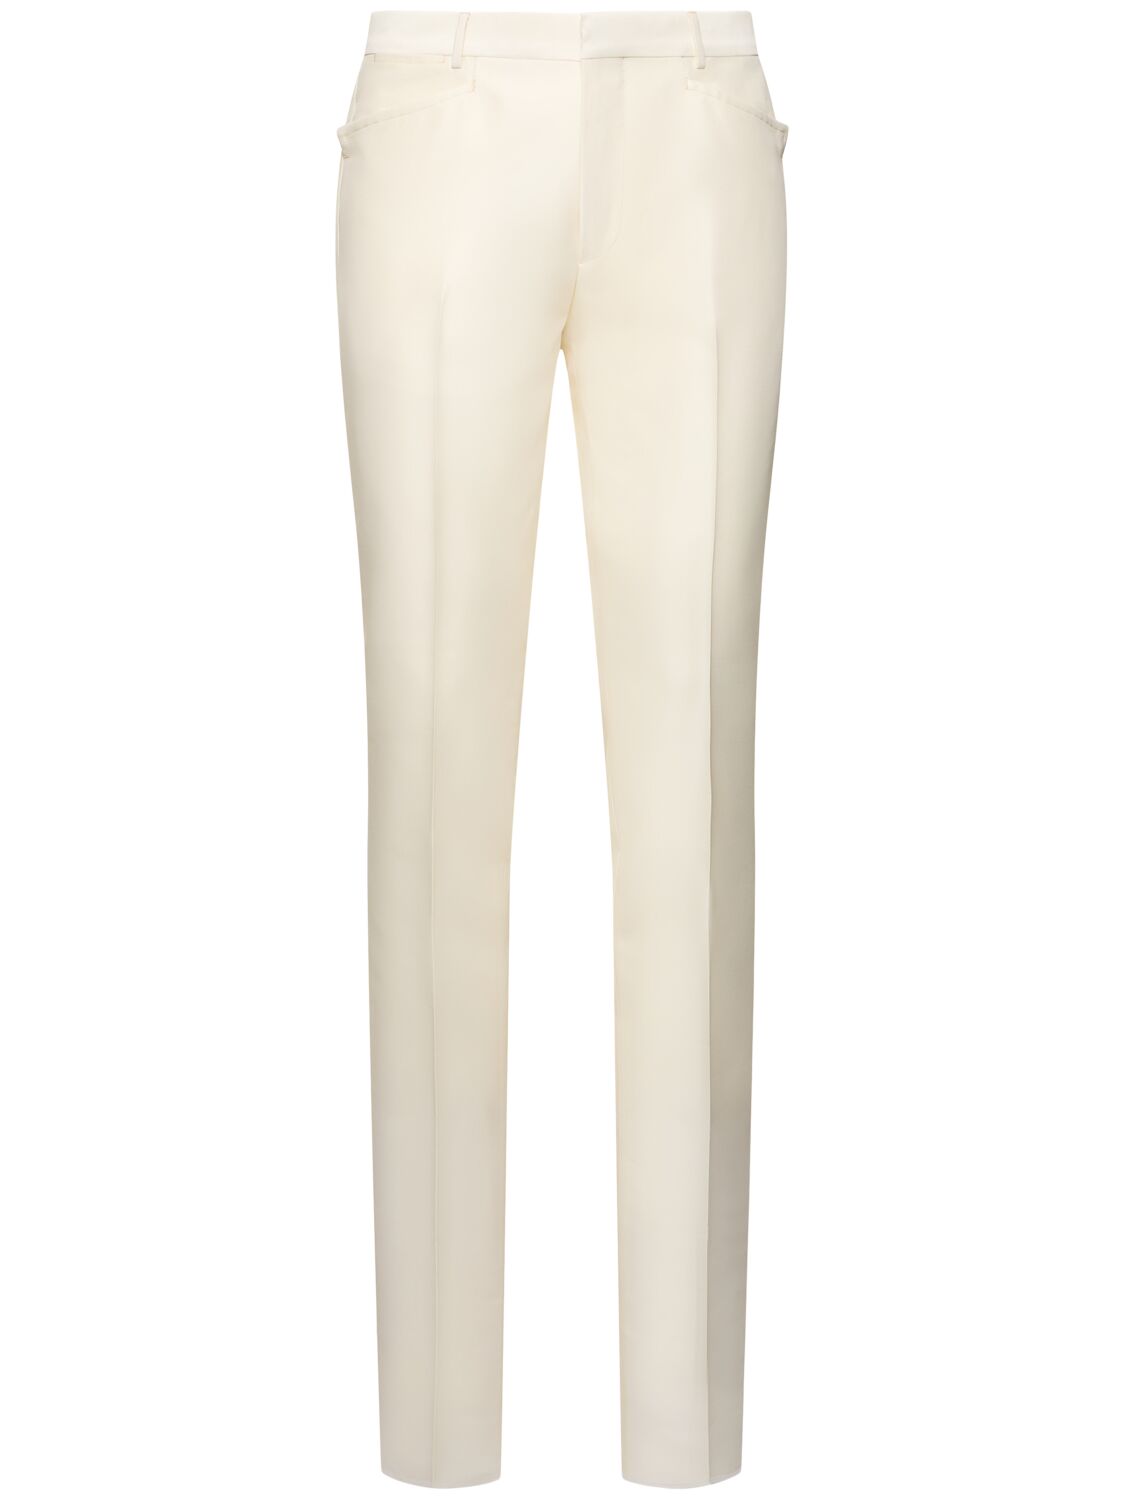 Tom Ford Atticus Wool Blend Faille Pants In Ivory